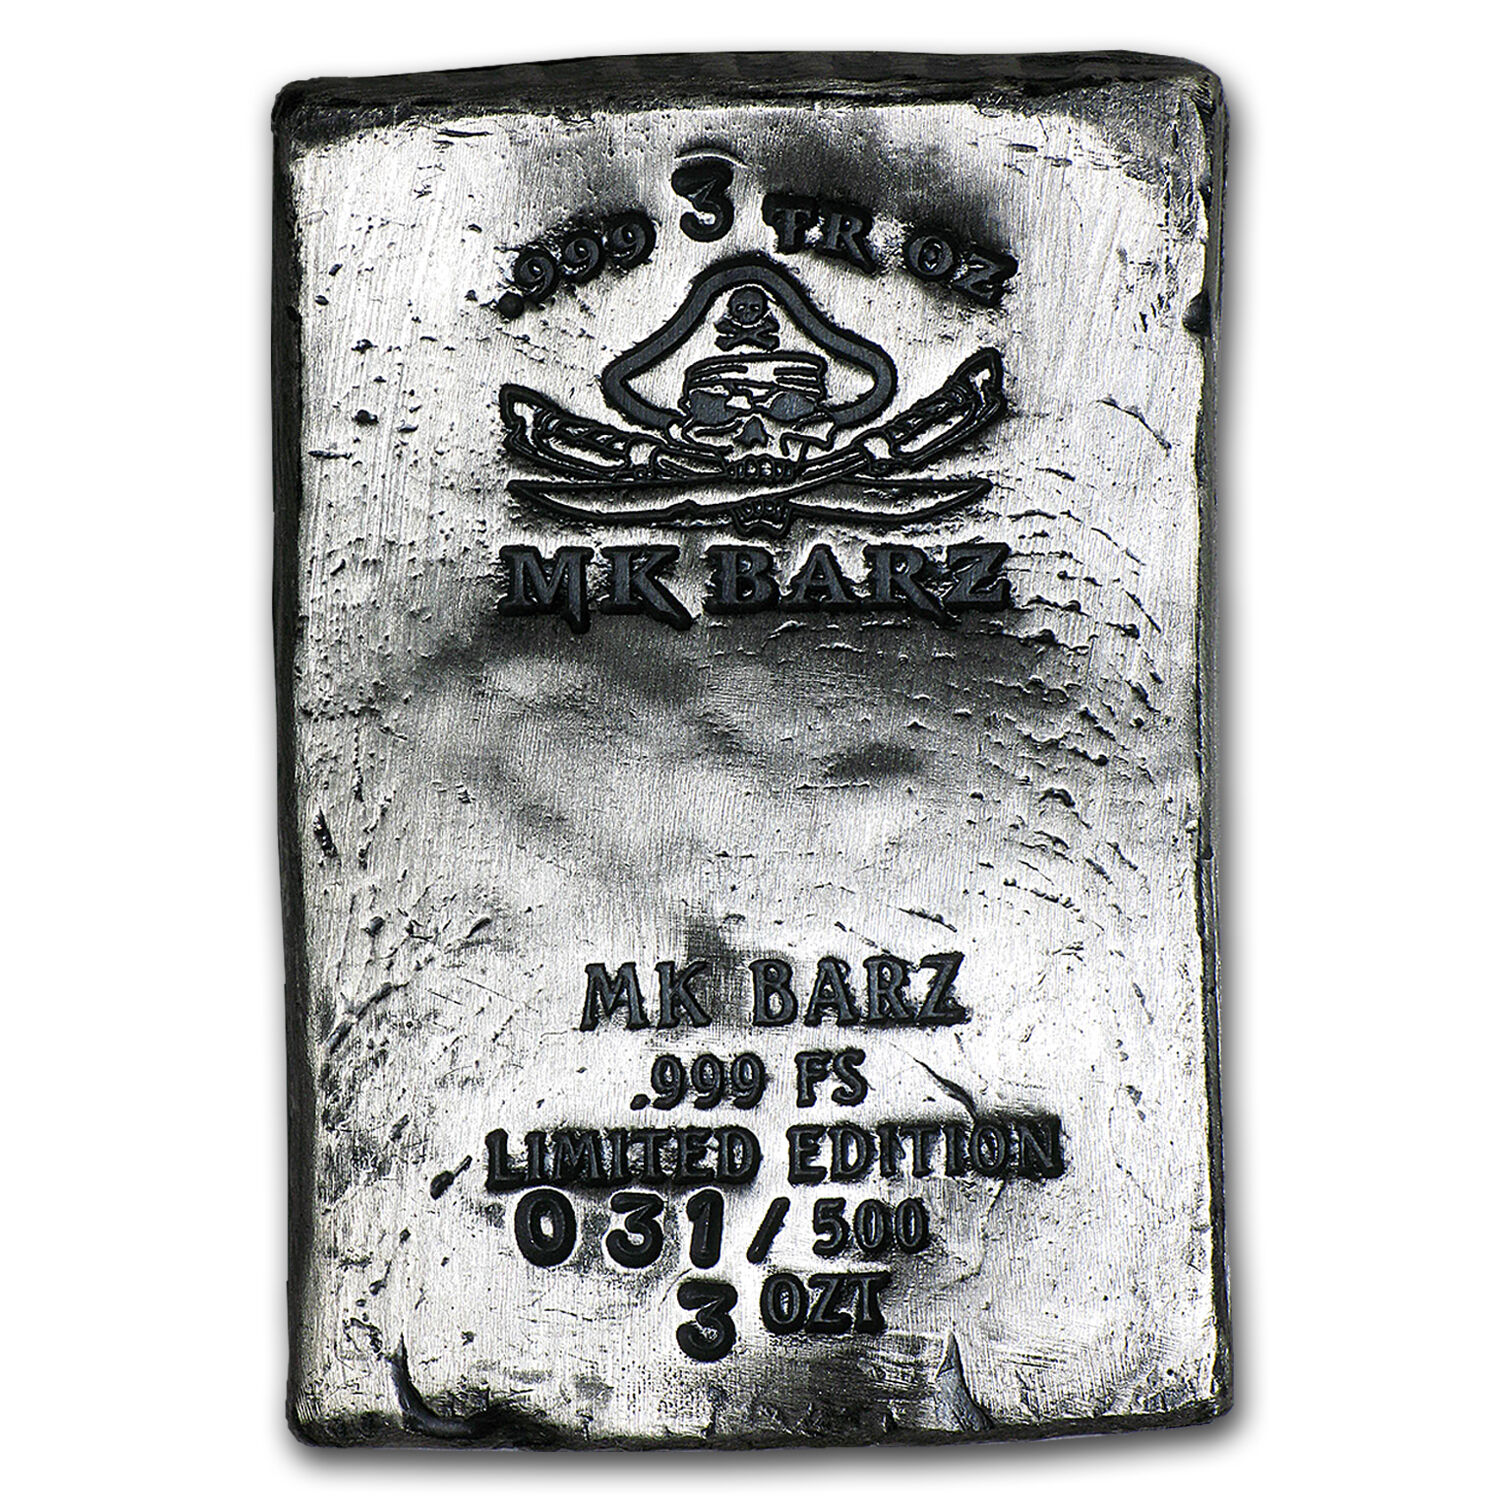 3 oz Silver Bar - Pirate Skull (Limited Edition, Type 2)